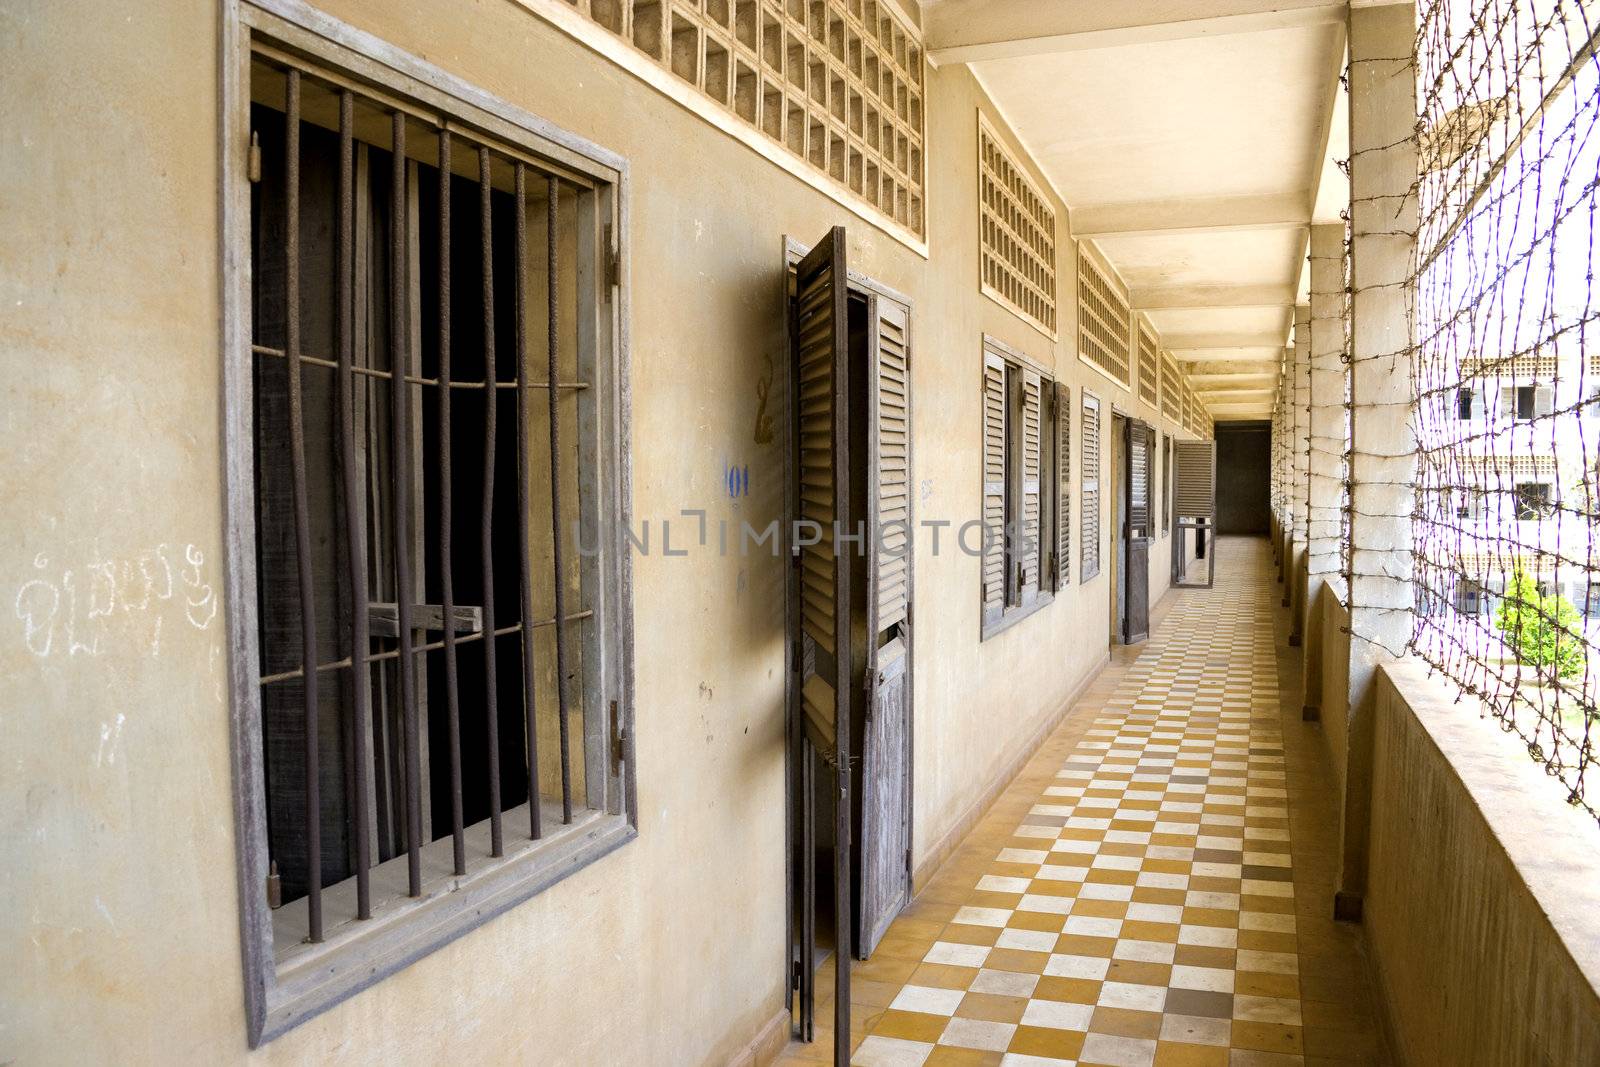 This is the actual prisonwhere many Cambodians were tortured and murdered by the Khmer Rouge. Formerly a school, converted into what was known as the notorious Security Prison 21 (S-21). About 17,000 people were interned here and only 12 survived. Now part of the Tuol Sleng Genocide Museum and it is in the same condition as when it was found by the liberating Vietnamese forces.